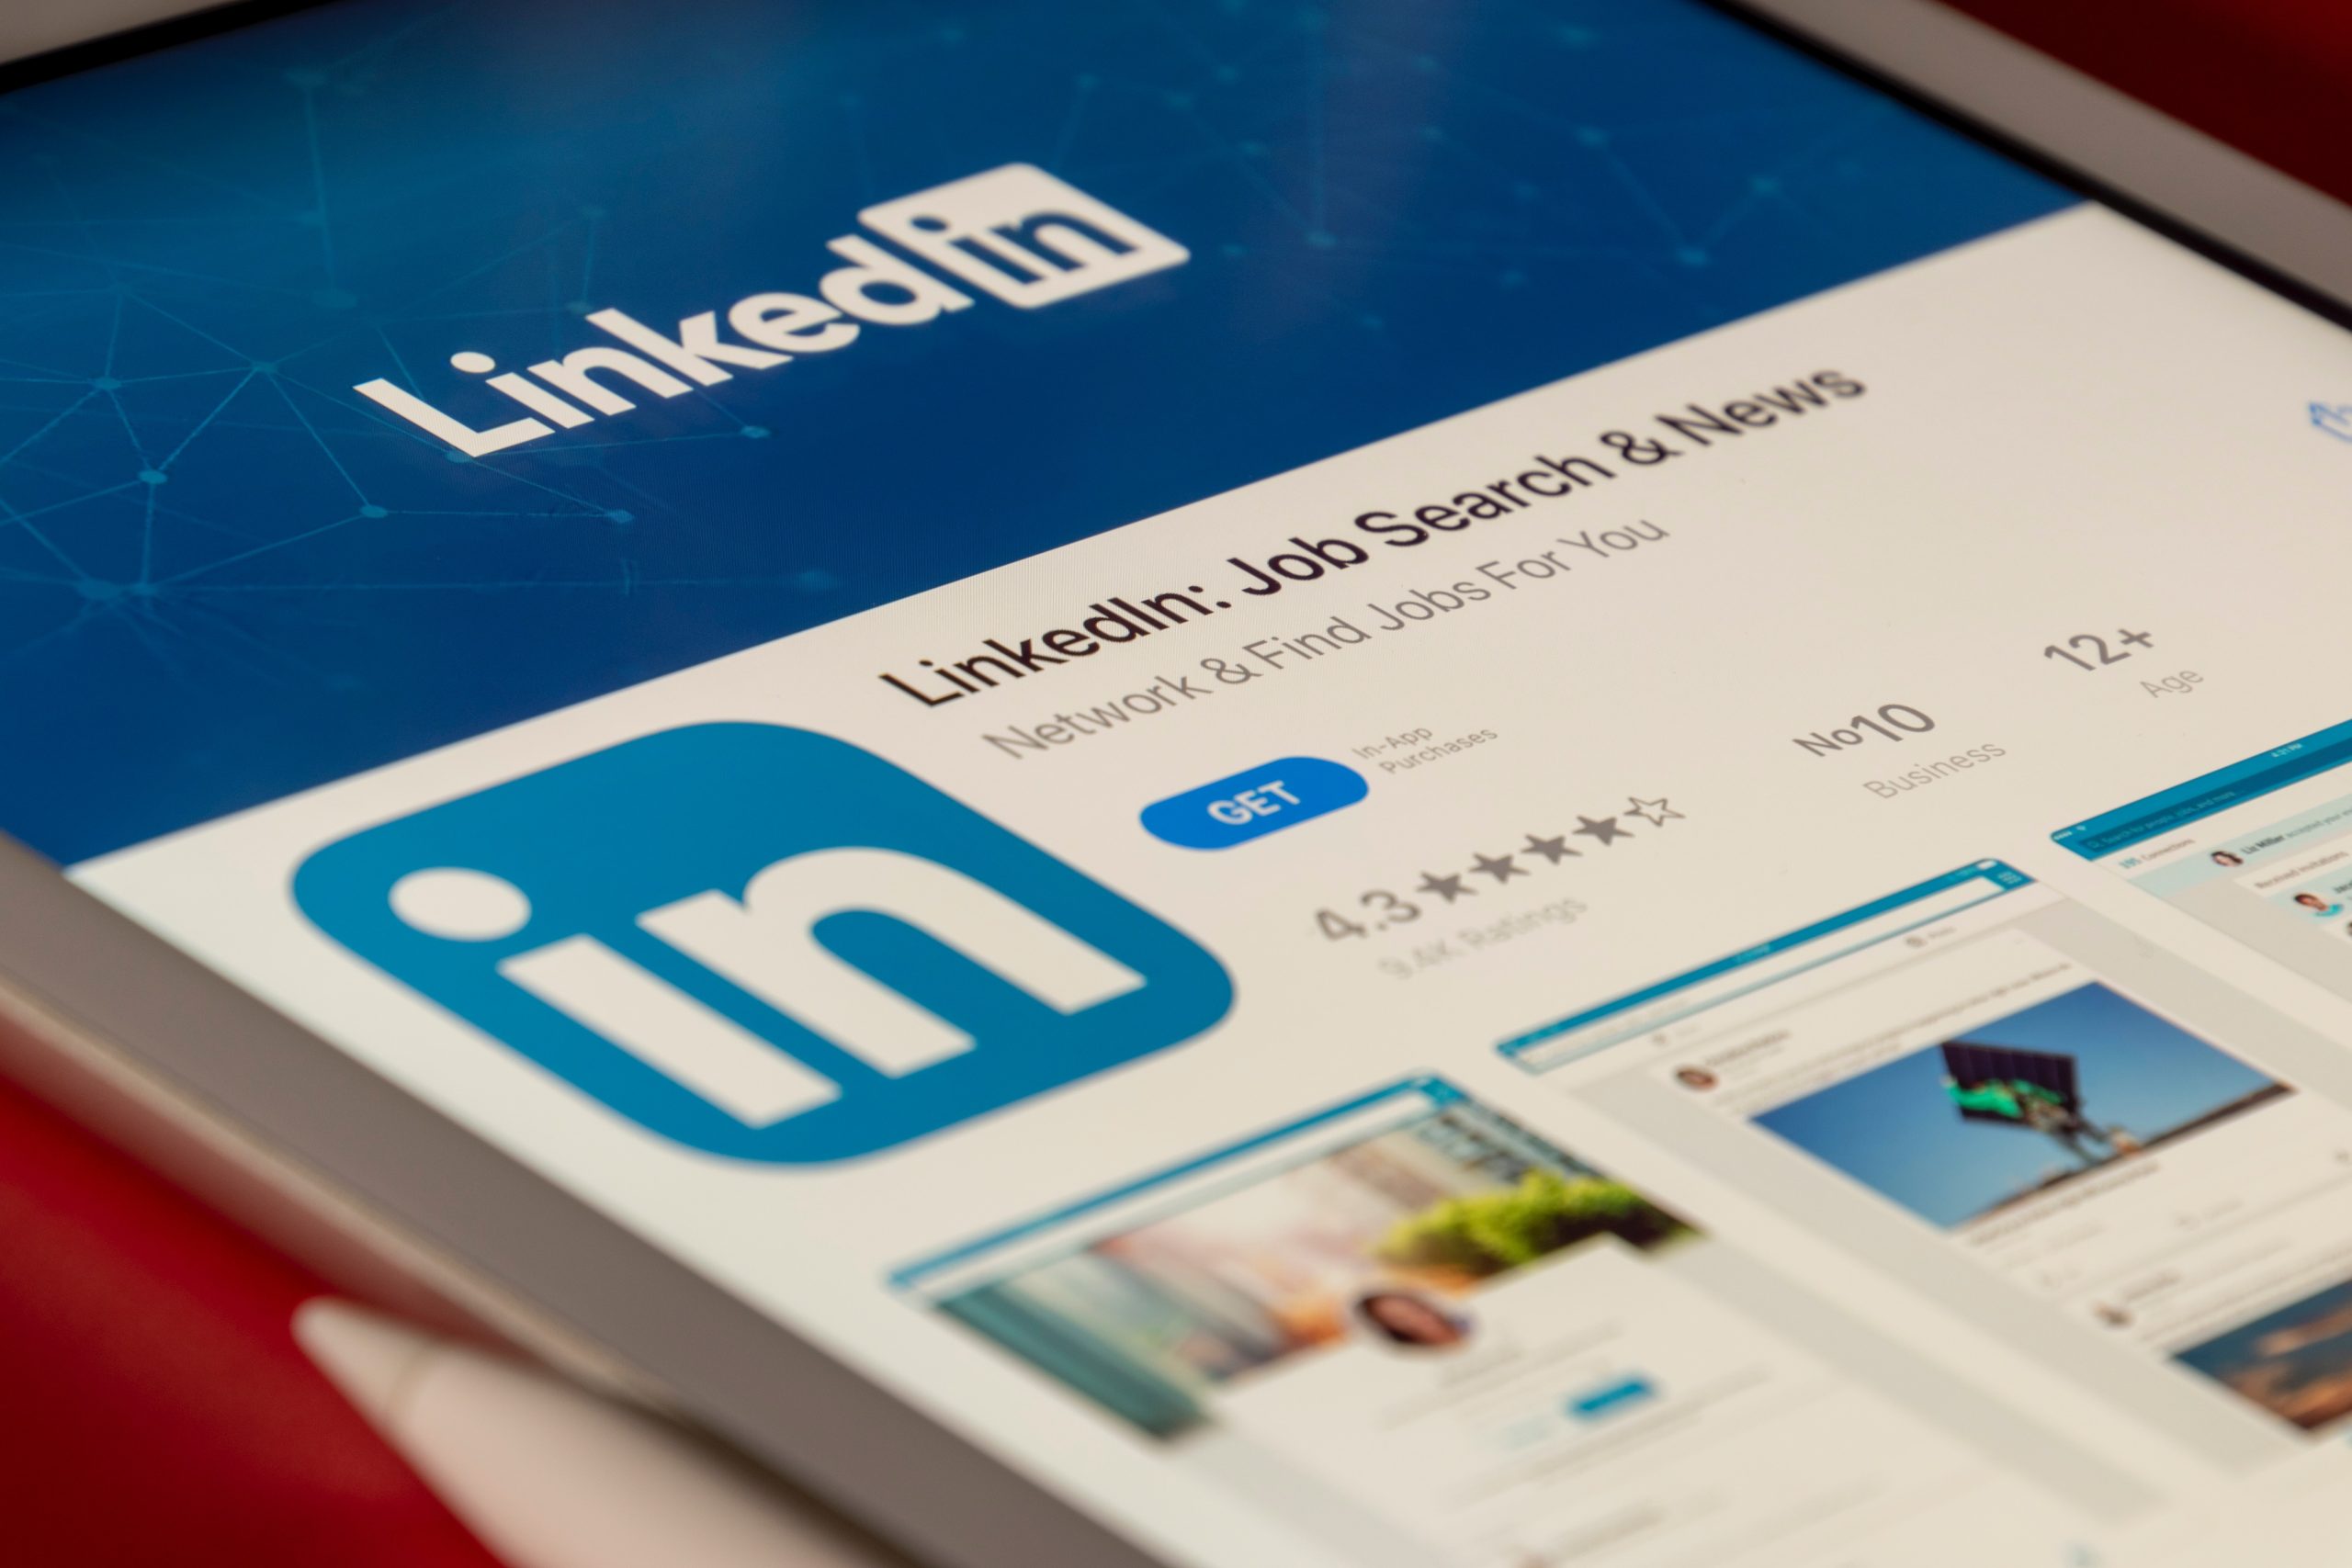 Why Search LinkedIn Without Logging In